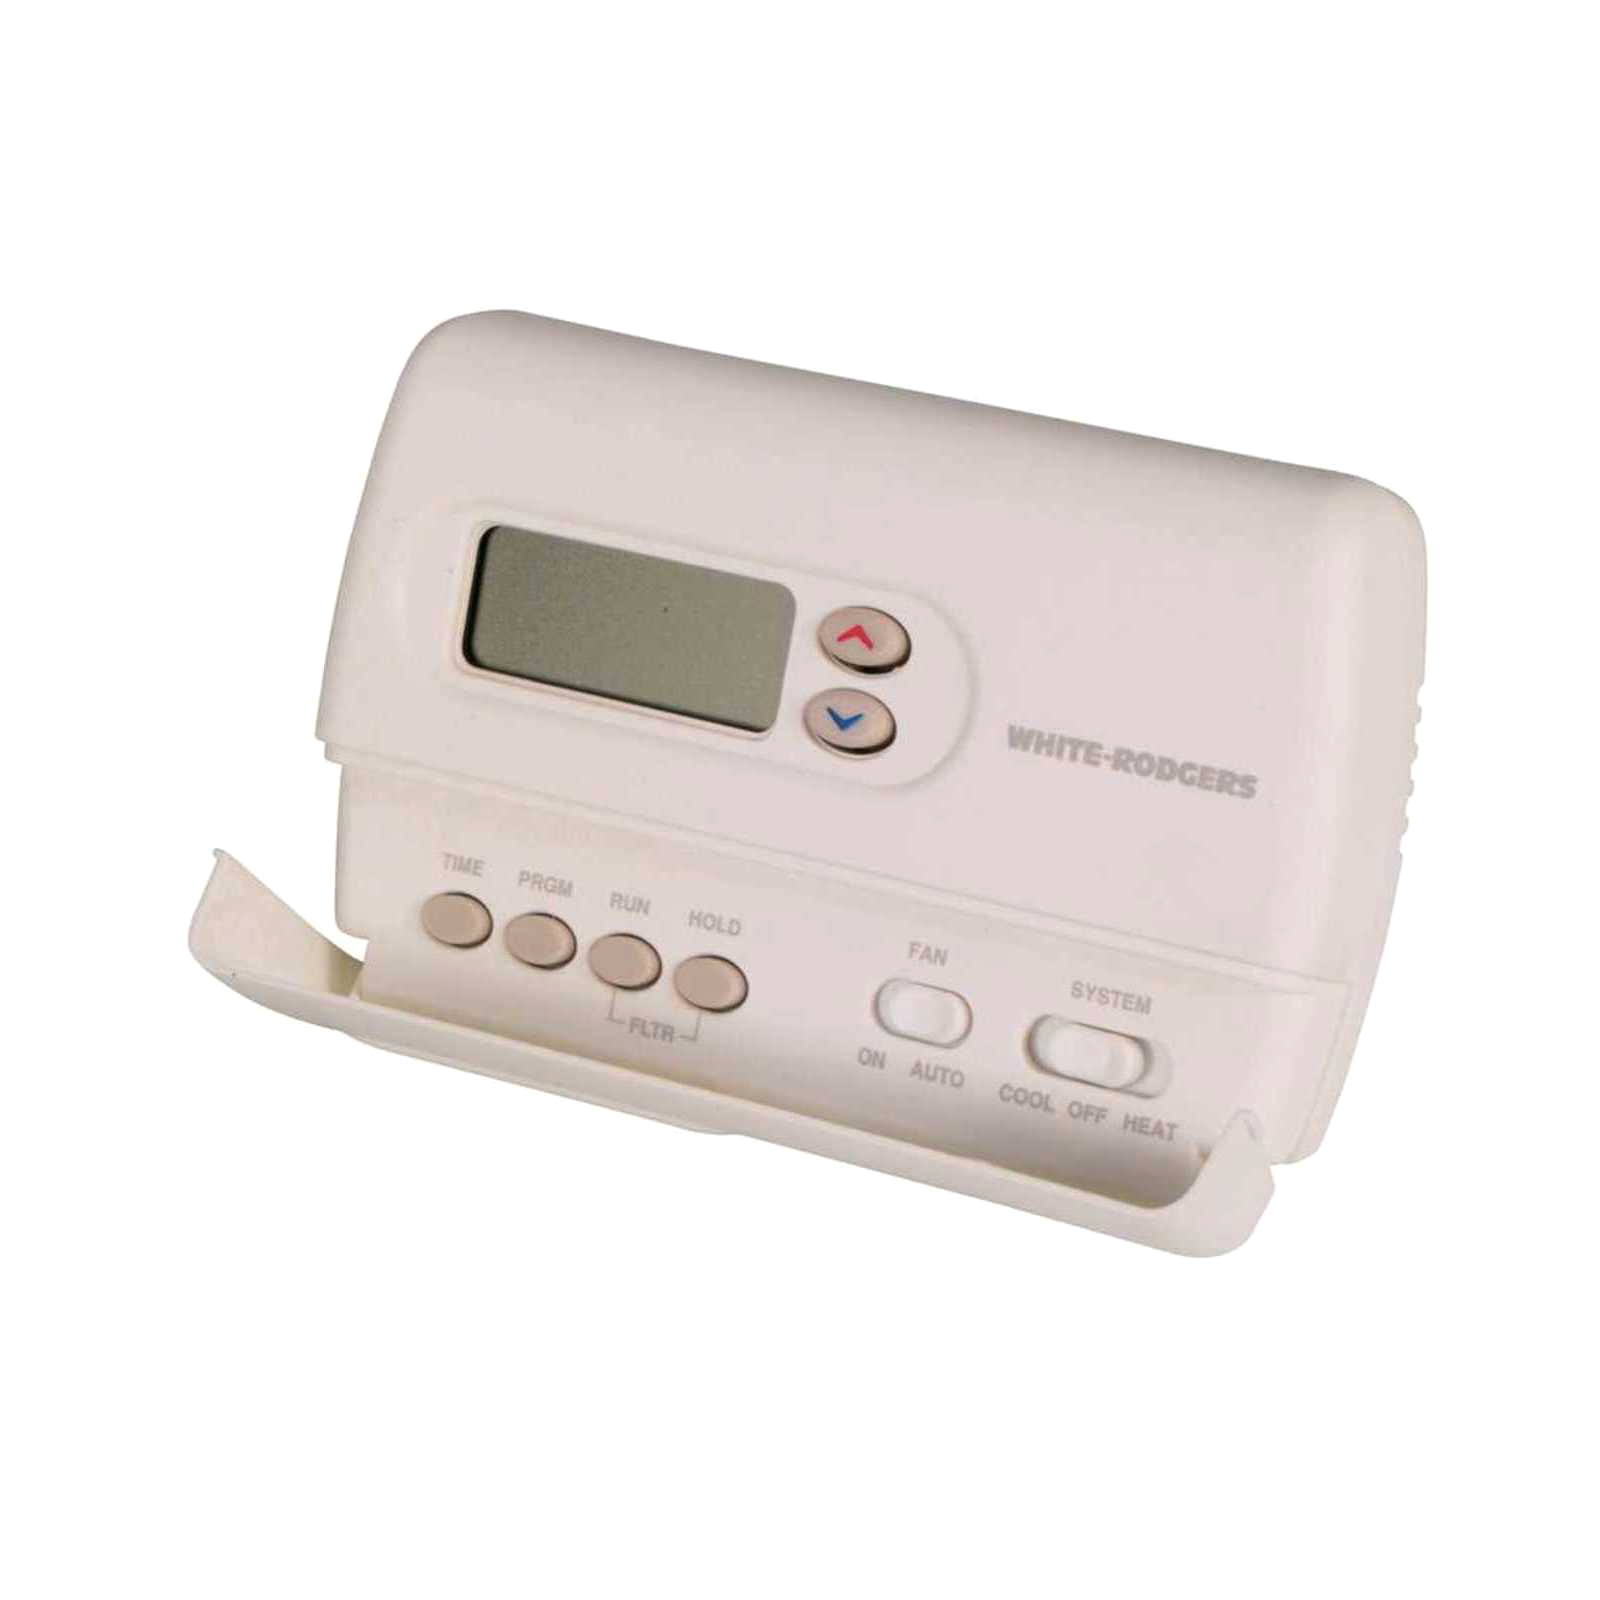 White Rodgers 80 Series Digital Thermostat 